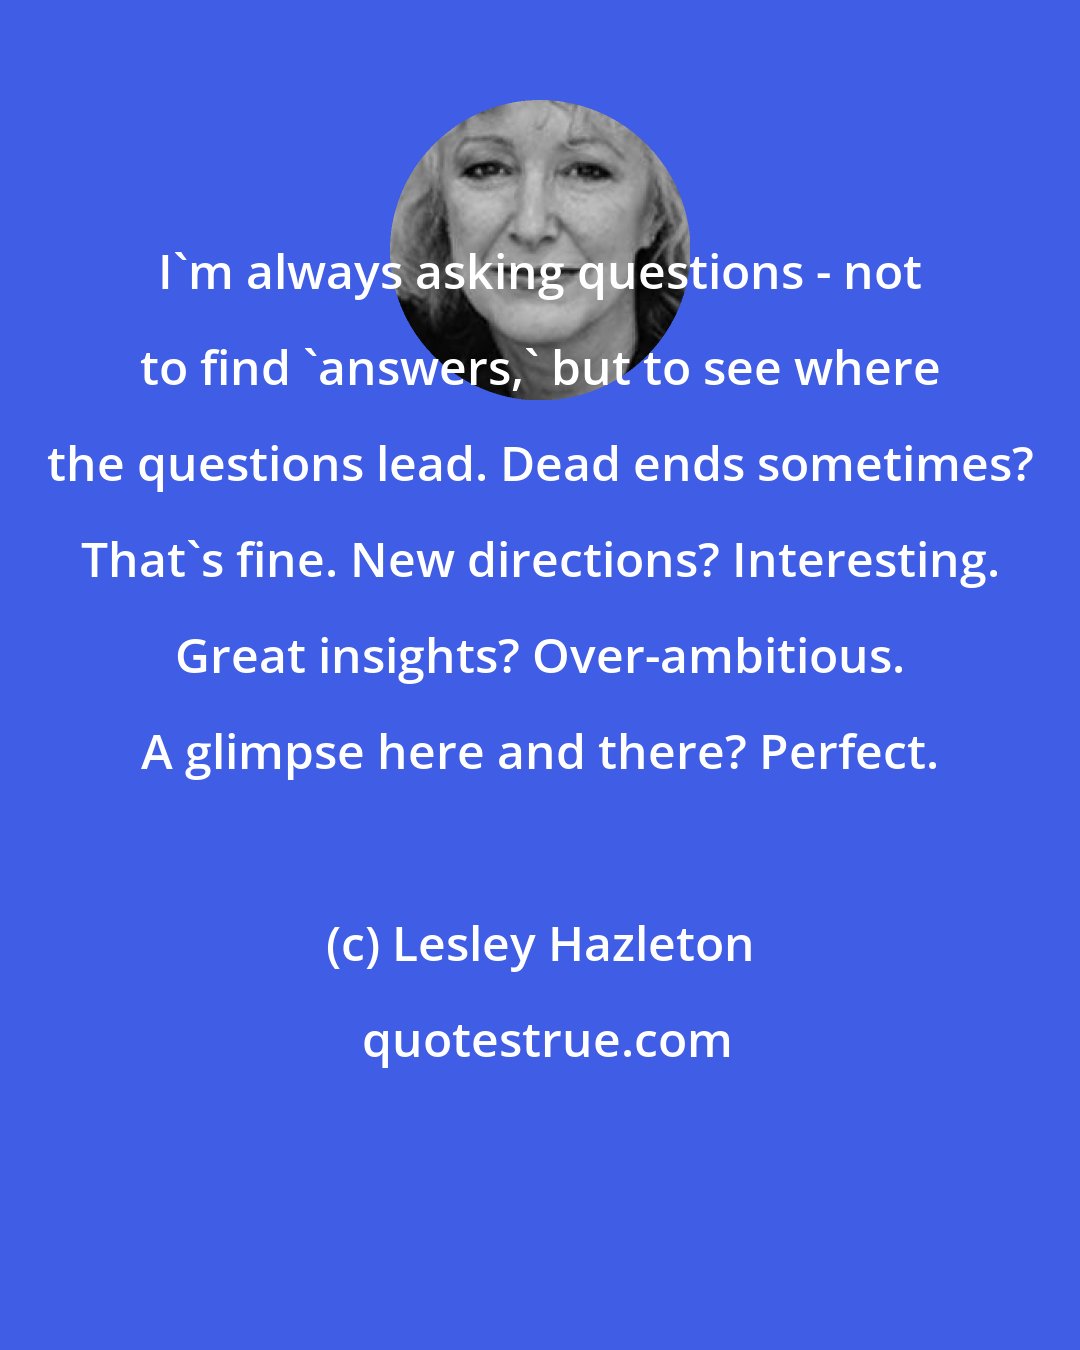 Lesley Hazleton: I'm always asking questions - not to find 'answers,' but to see where the questions lead. Dead ends sometimes? That's fine. New directions? Interesting. Great insights? Over-ambitious. A glimpse here and there? Perfect.